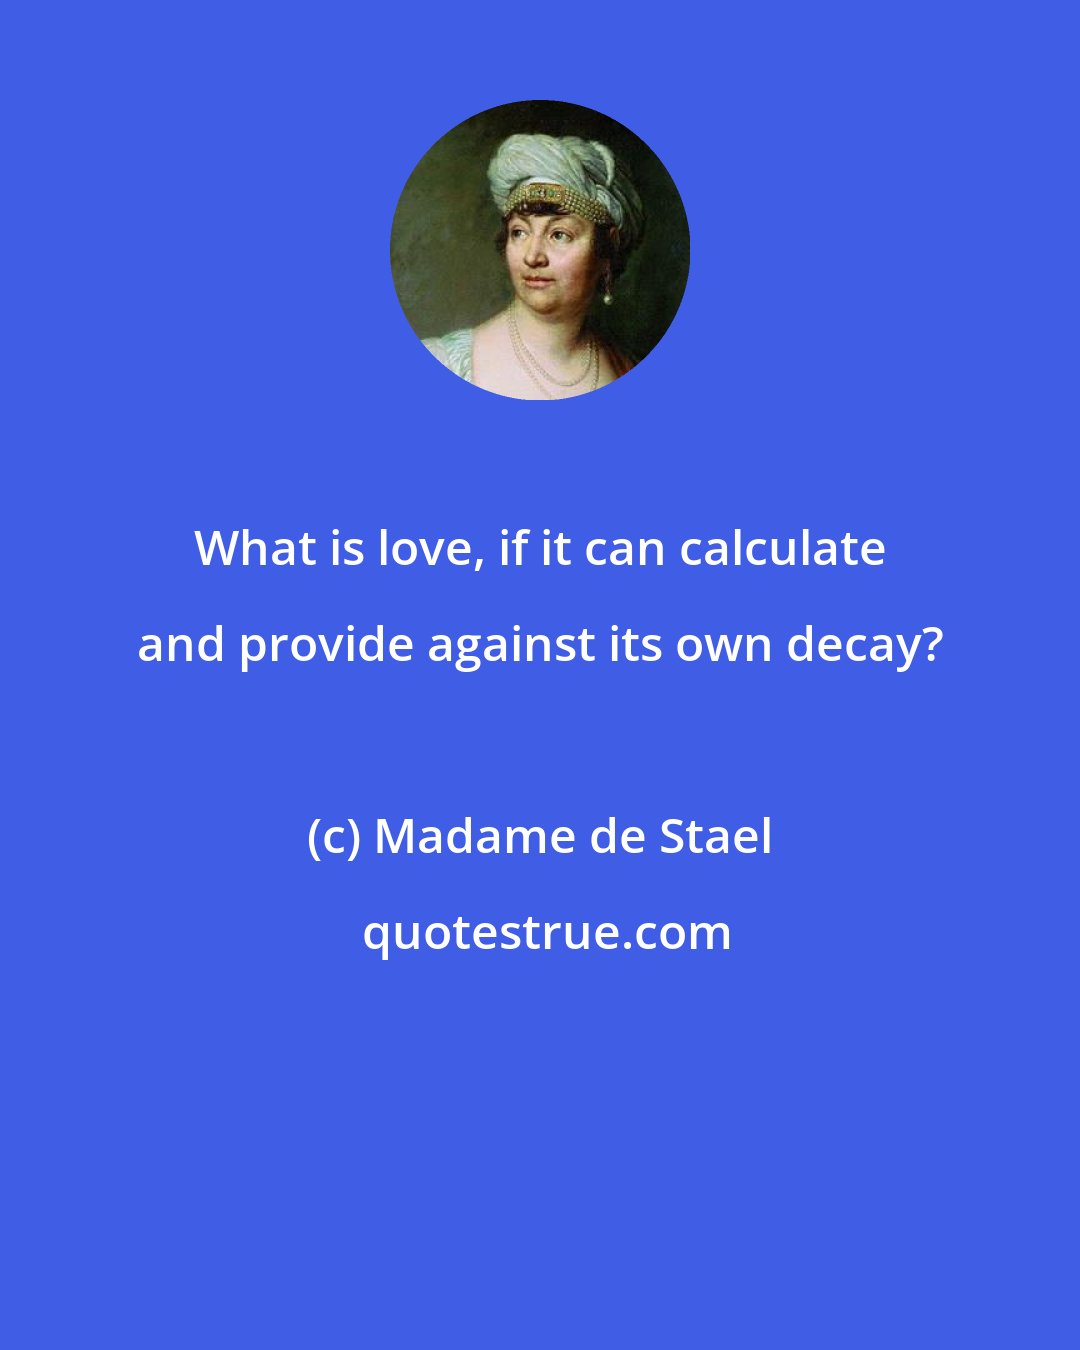 Madame de Stael: What is love, if it can calculate and provide against its own decay?